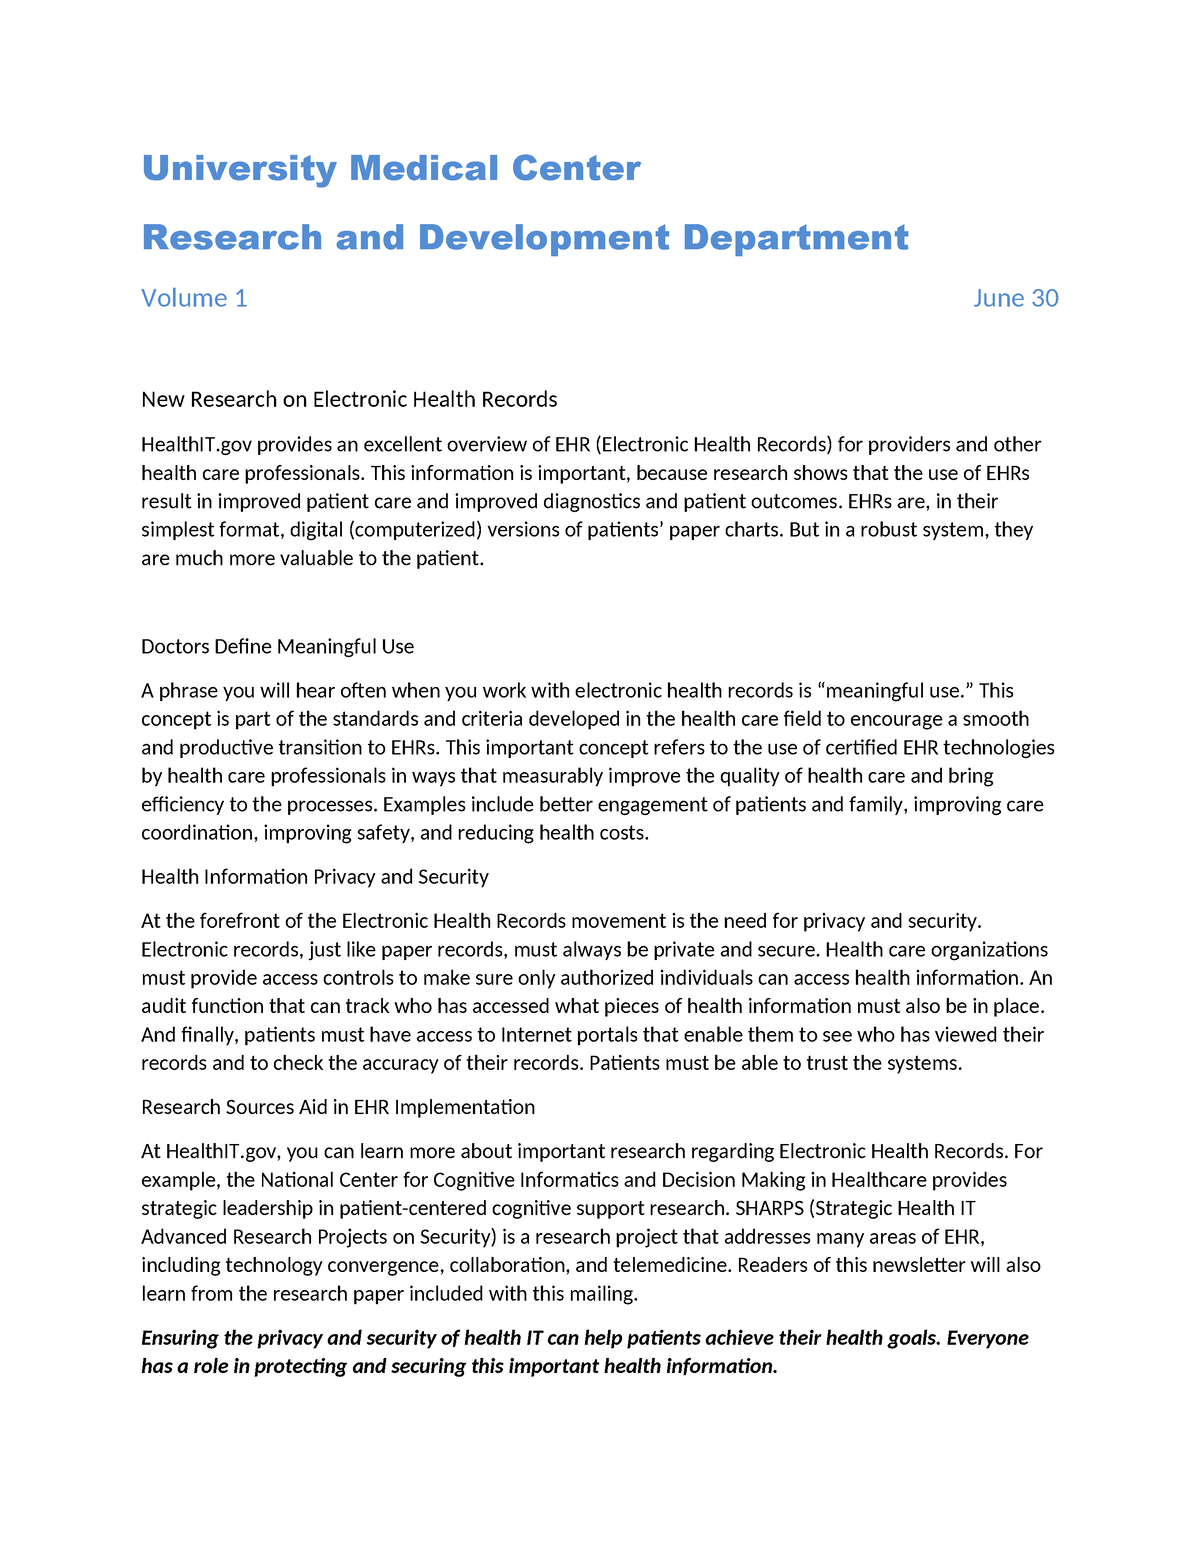 Horner Word 3G Research Paper and Newsletter - University Medical ...